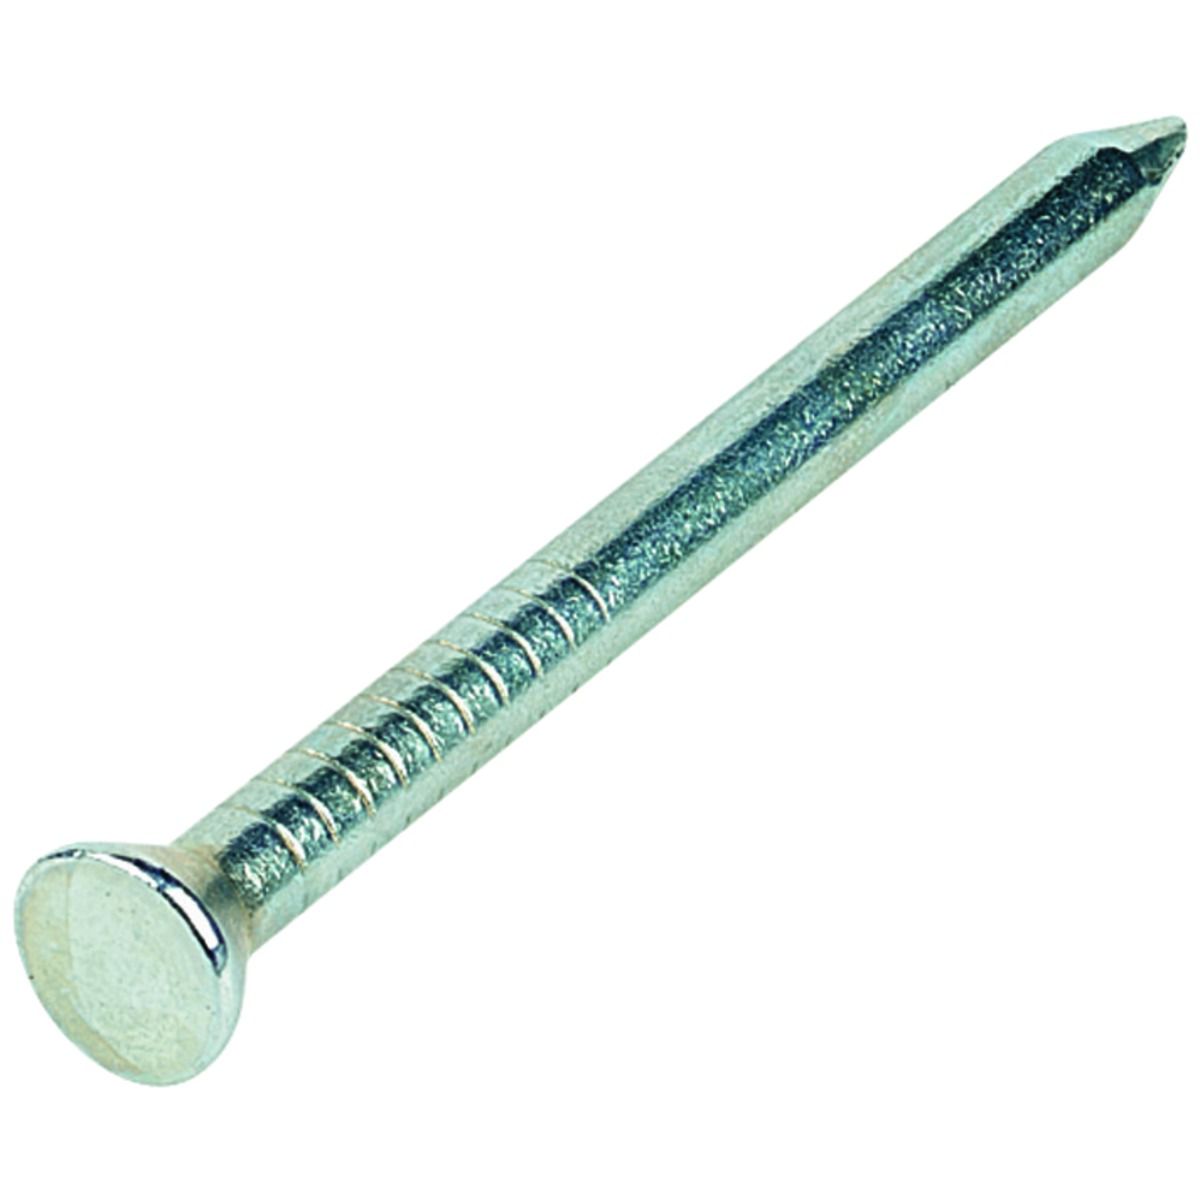 Image of Wickes 25mm Countersunk Head Masonry Nails - Pack of 100